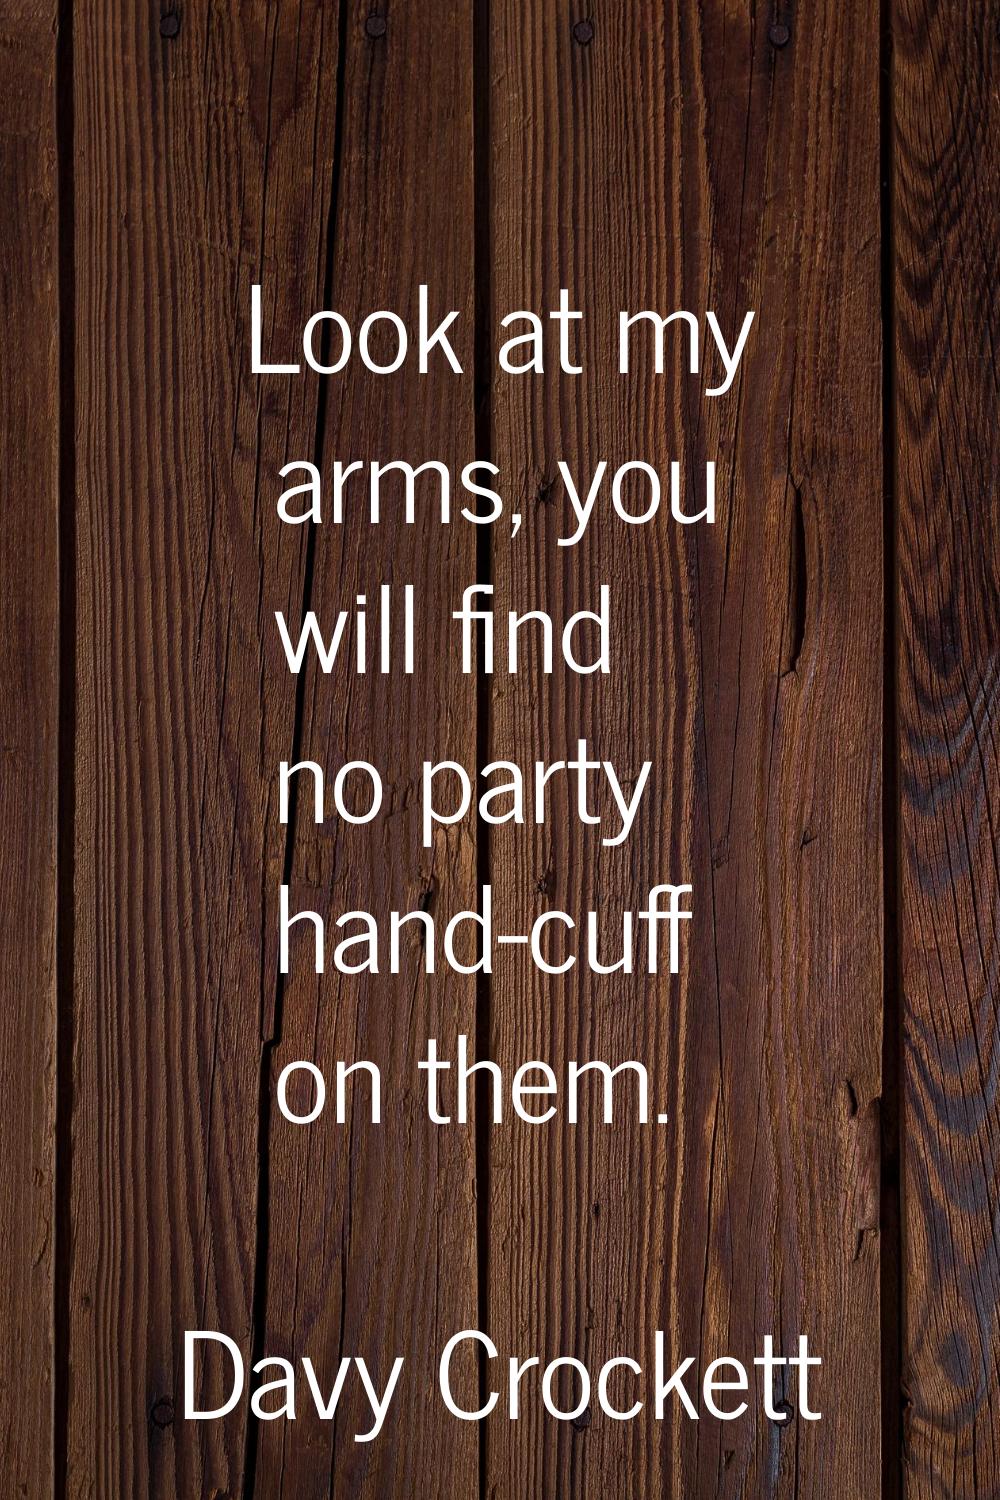 Look at my arms, you will find no party hand-cuff on them.